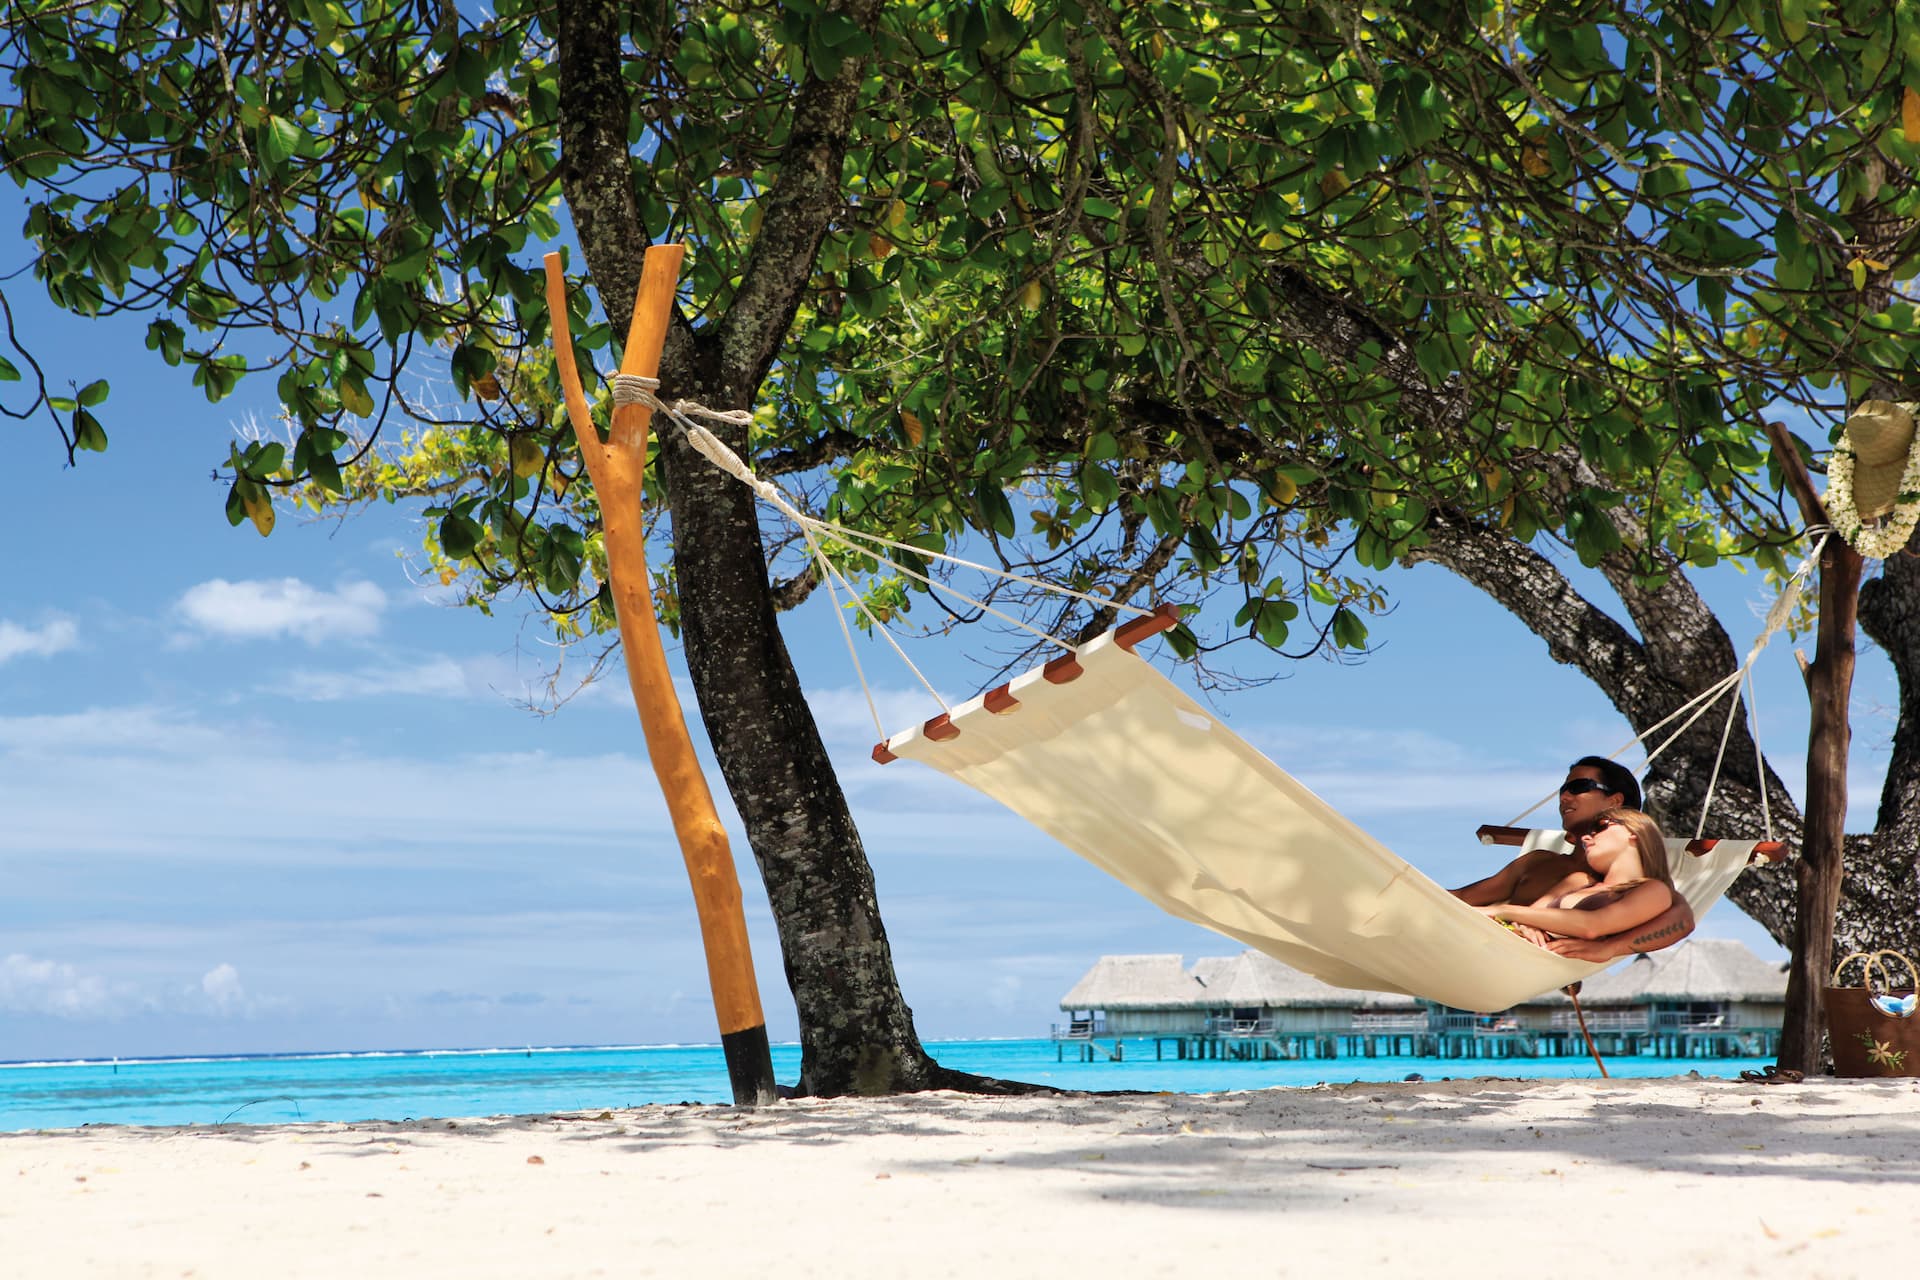 Couple relaxing in a hammock under green trees with Tahitian overwater bungalows in the background over turquoise waters.